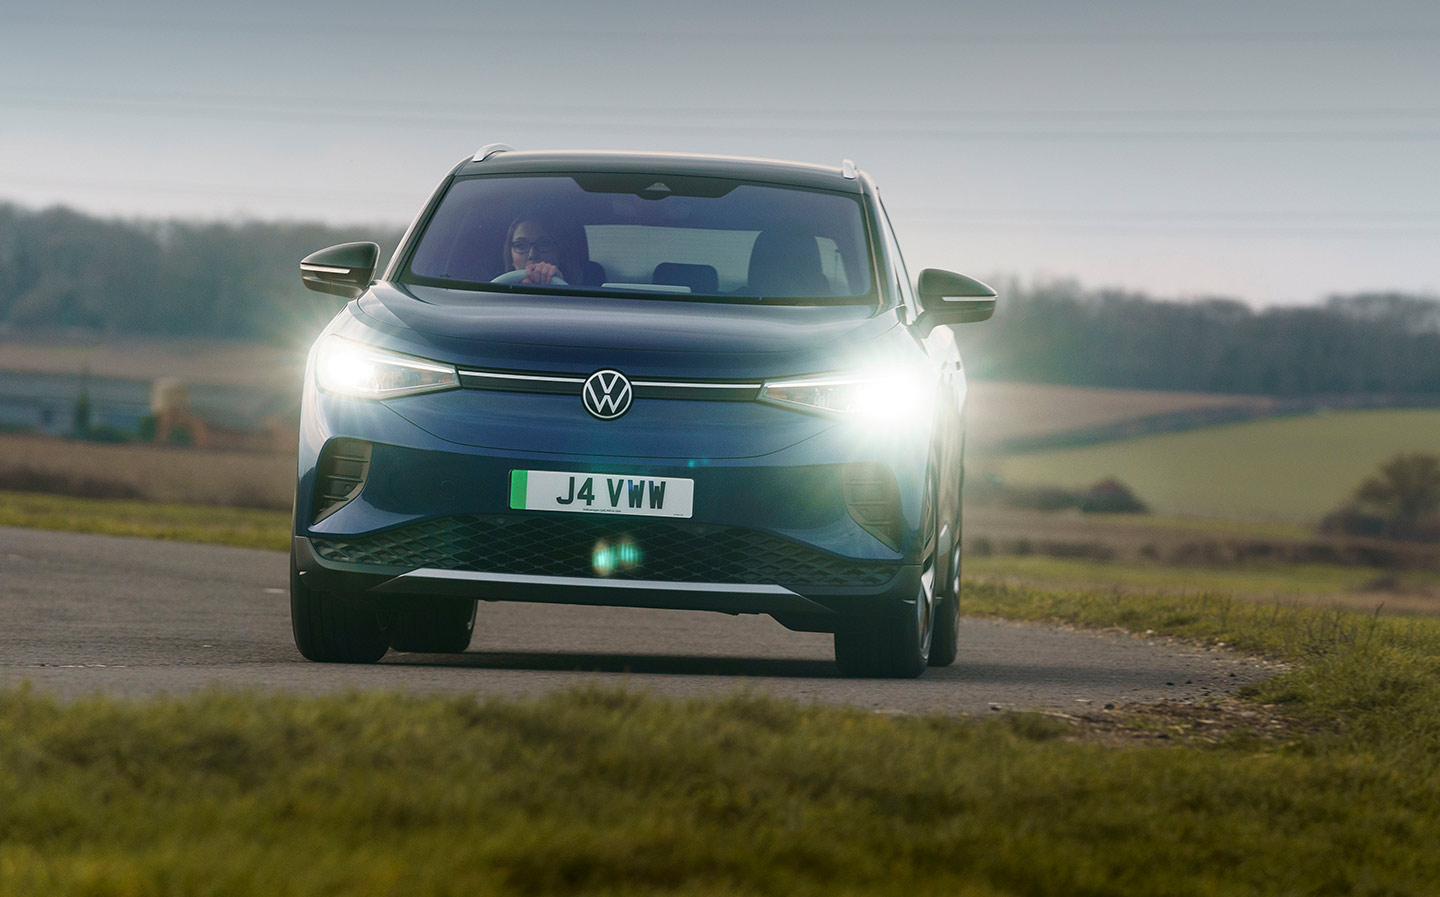 Volkswagen ID4 electric car review by Will Dron for Sunday Times Driving.co.uk